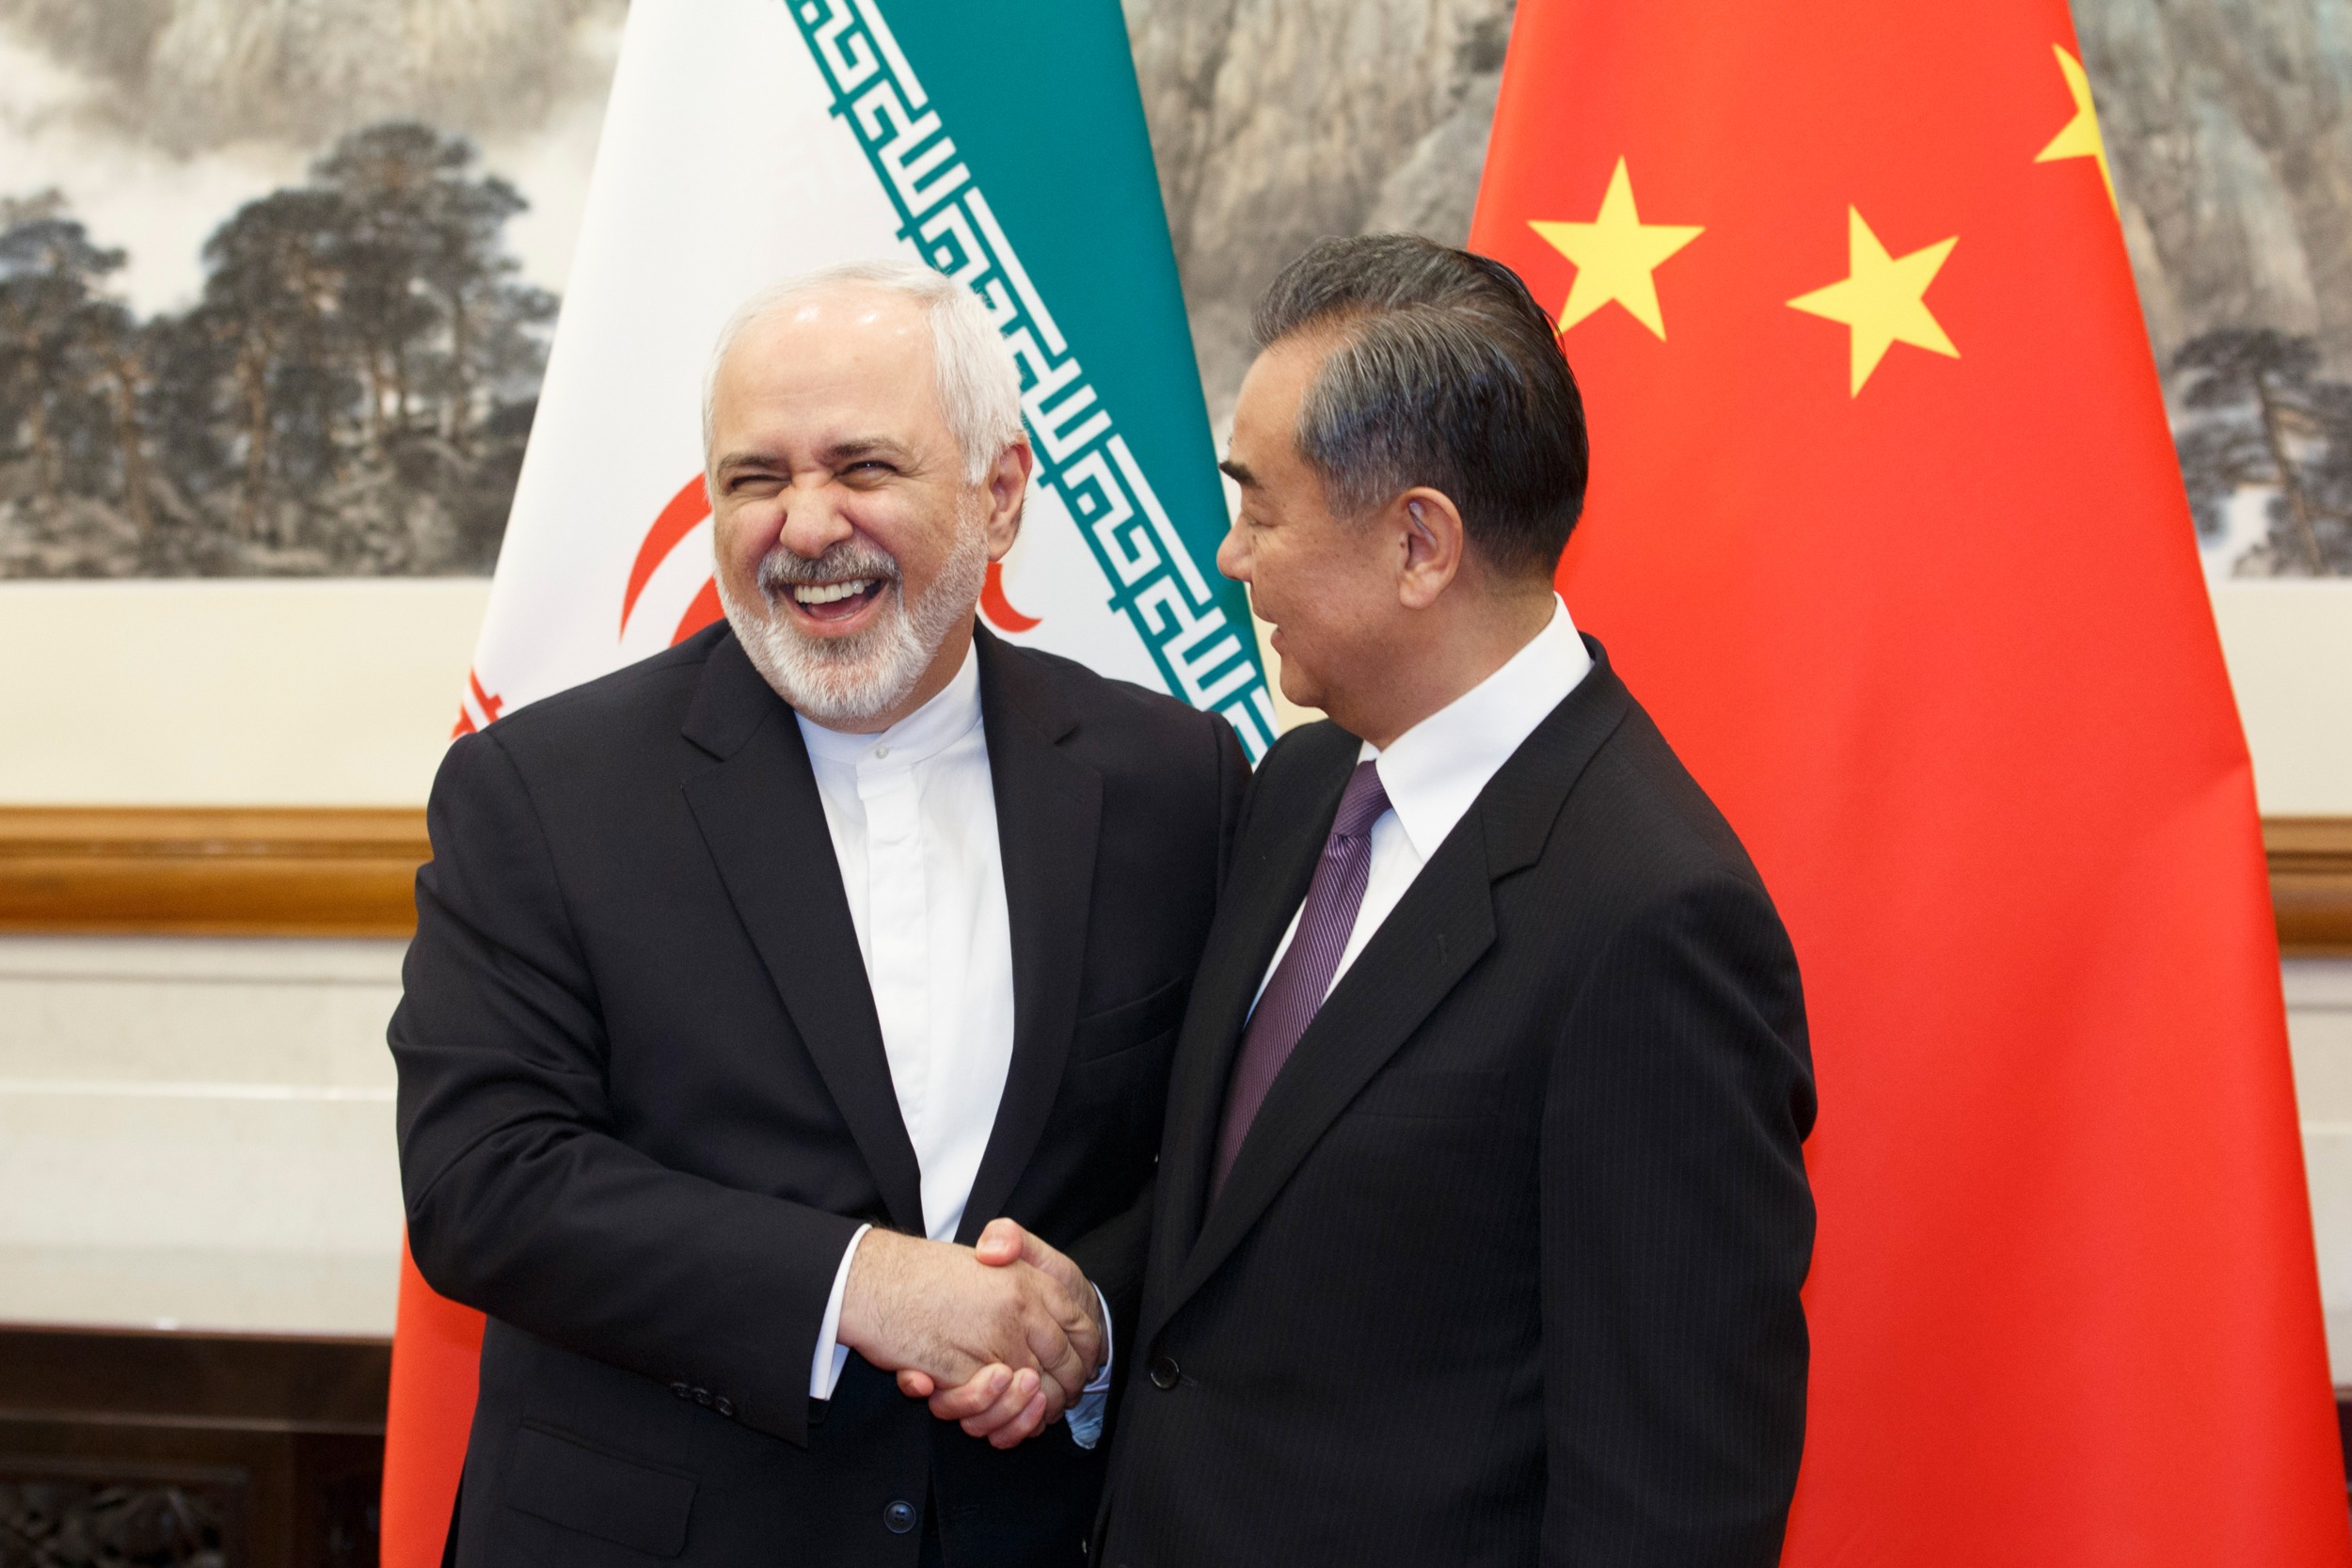 turning-eastward-iran-and-china-strengthen-ties-in-the-face-of-western